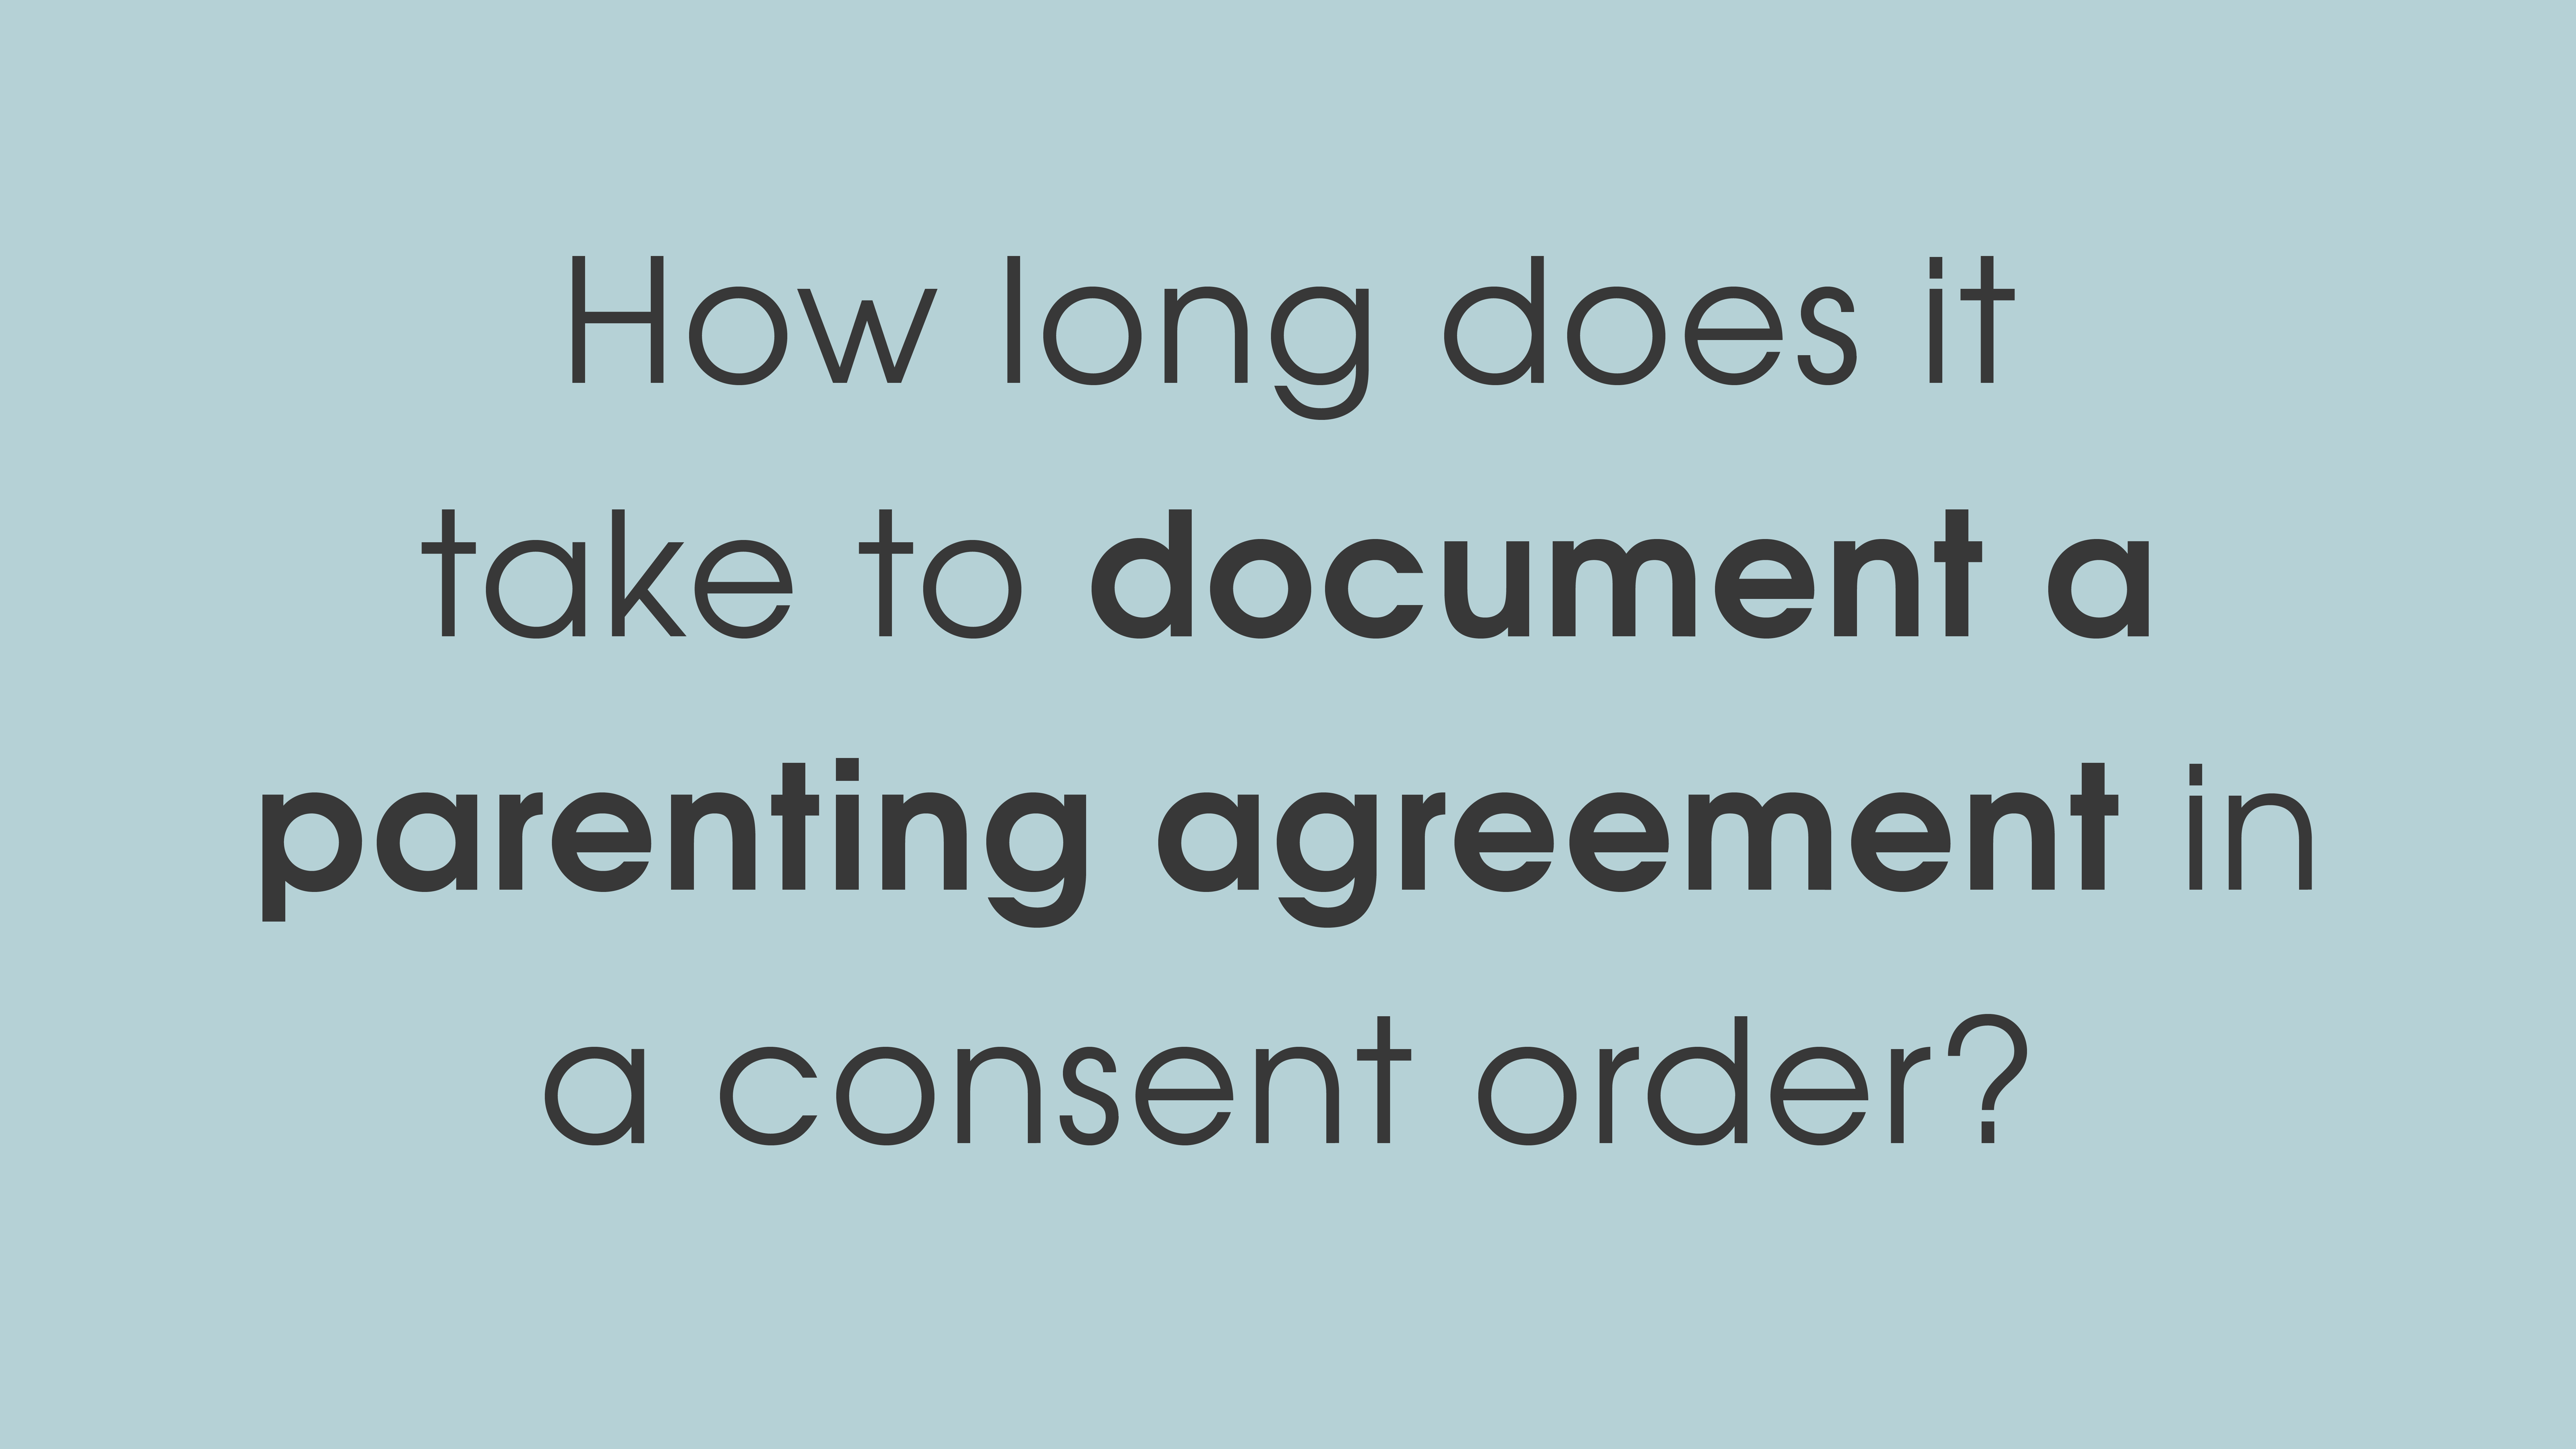 How long does it take to document a parenting agreement in a consent order?